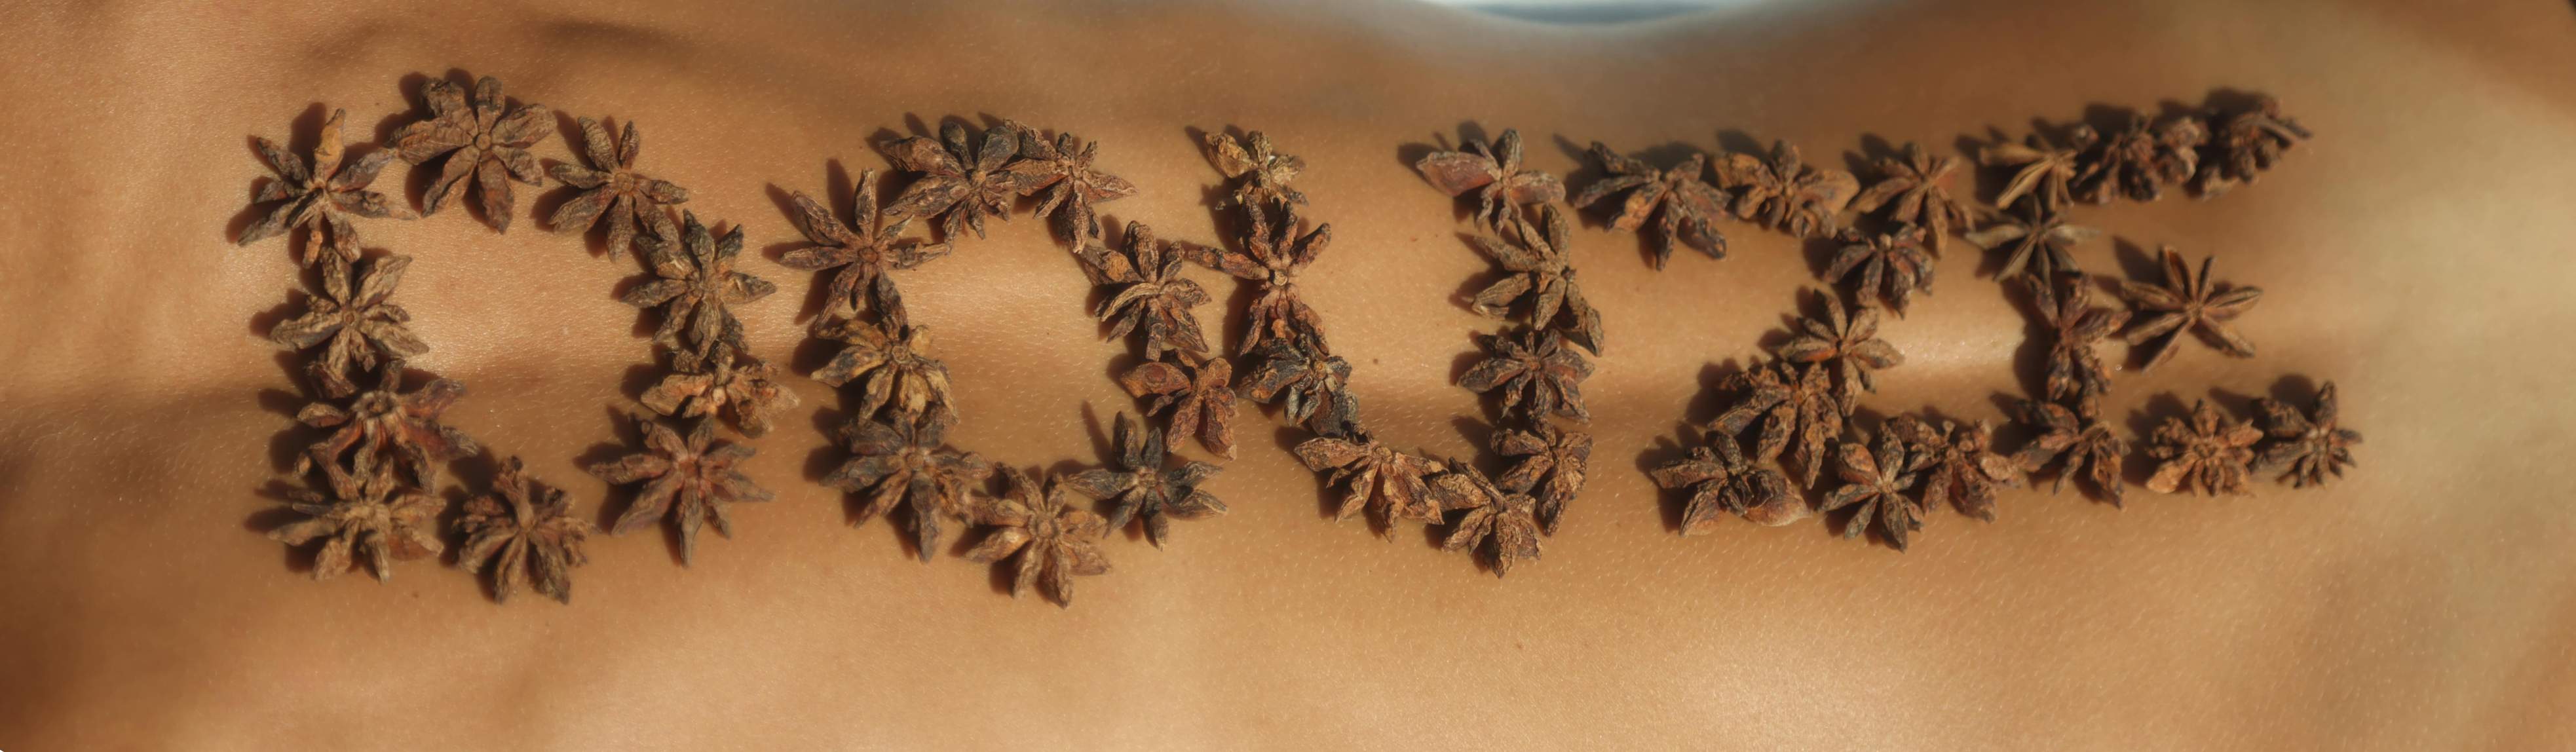 Douze spelled out using star anise on a woman's back